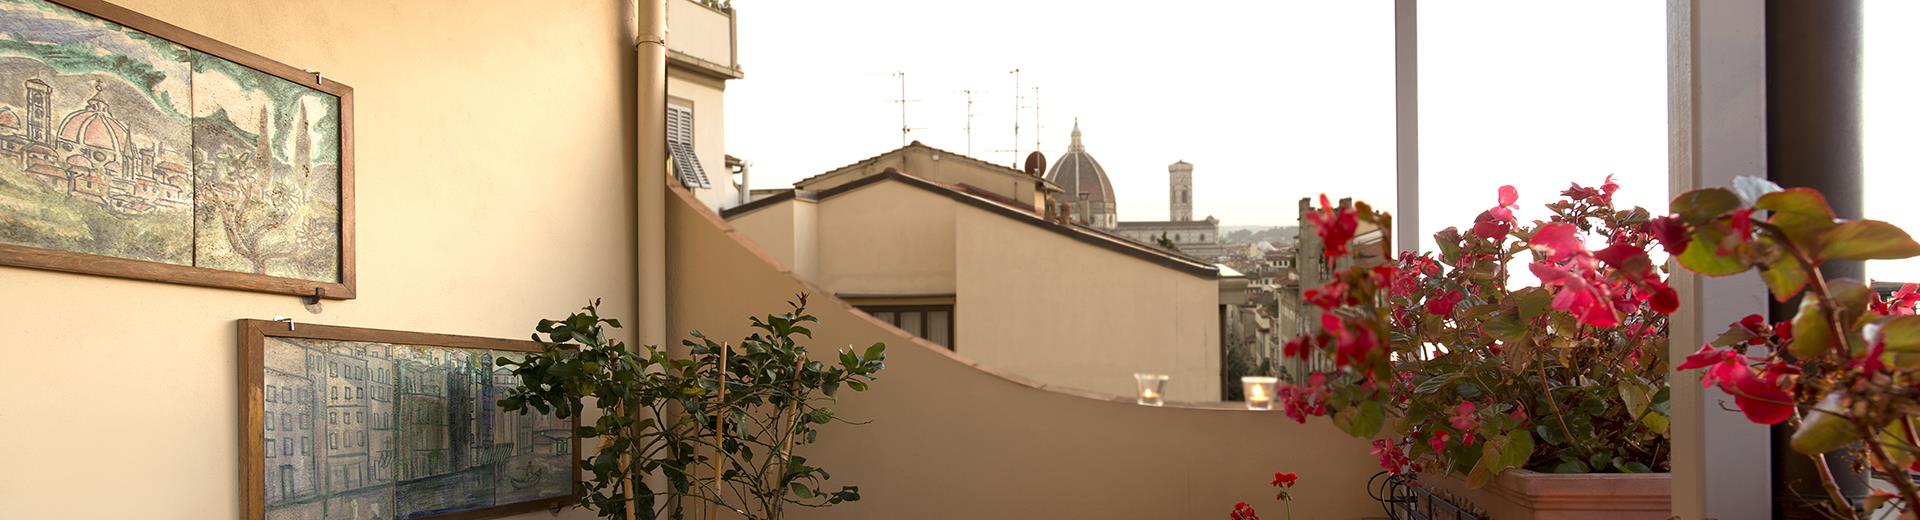 Enjoy the beautiful view of the  lovely 4 star Sure Hotel Collection De La Pace, centrally located in Florence. Book now!